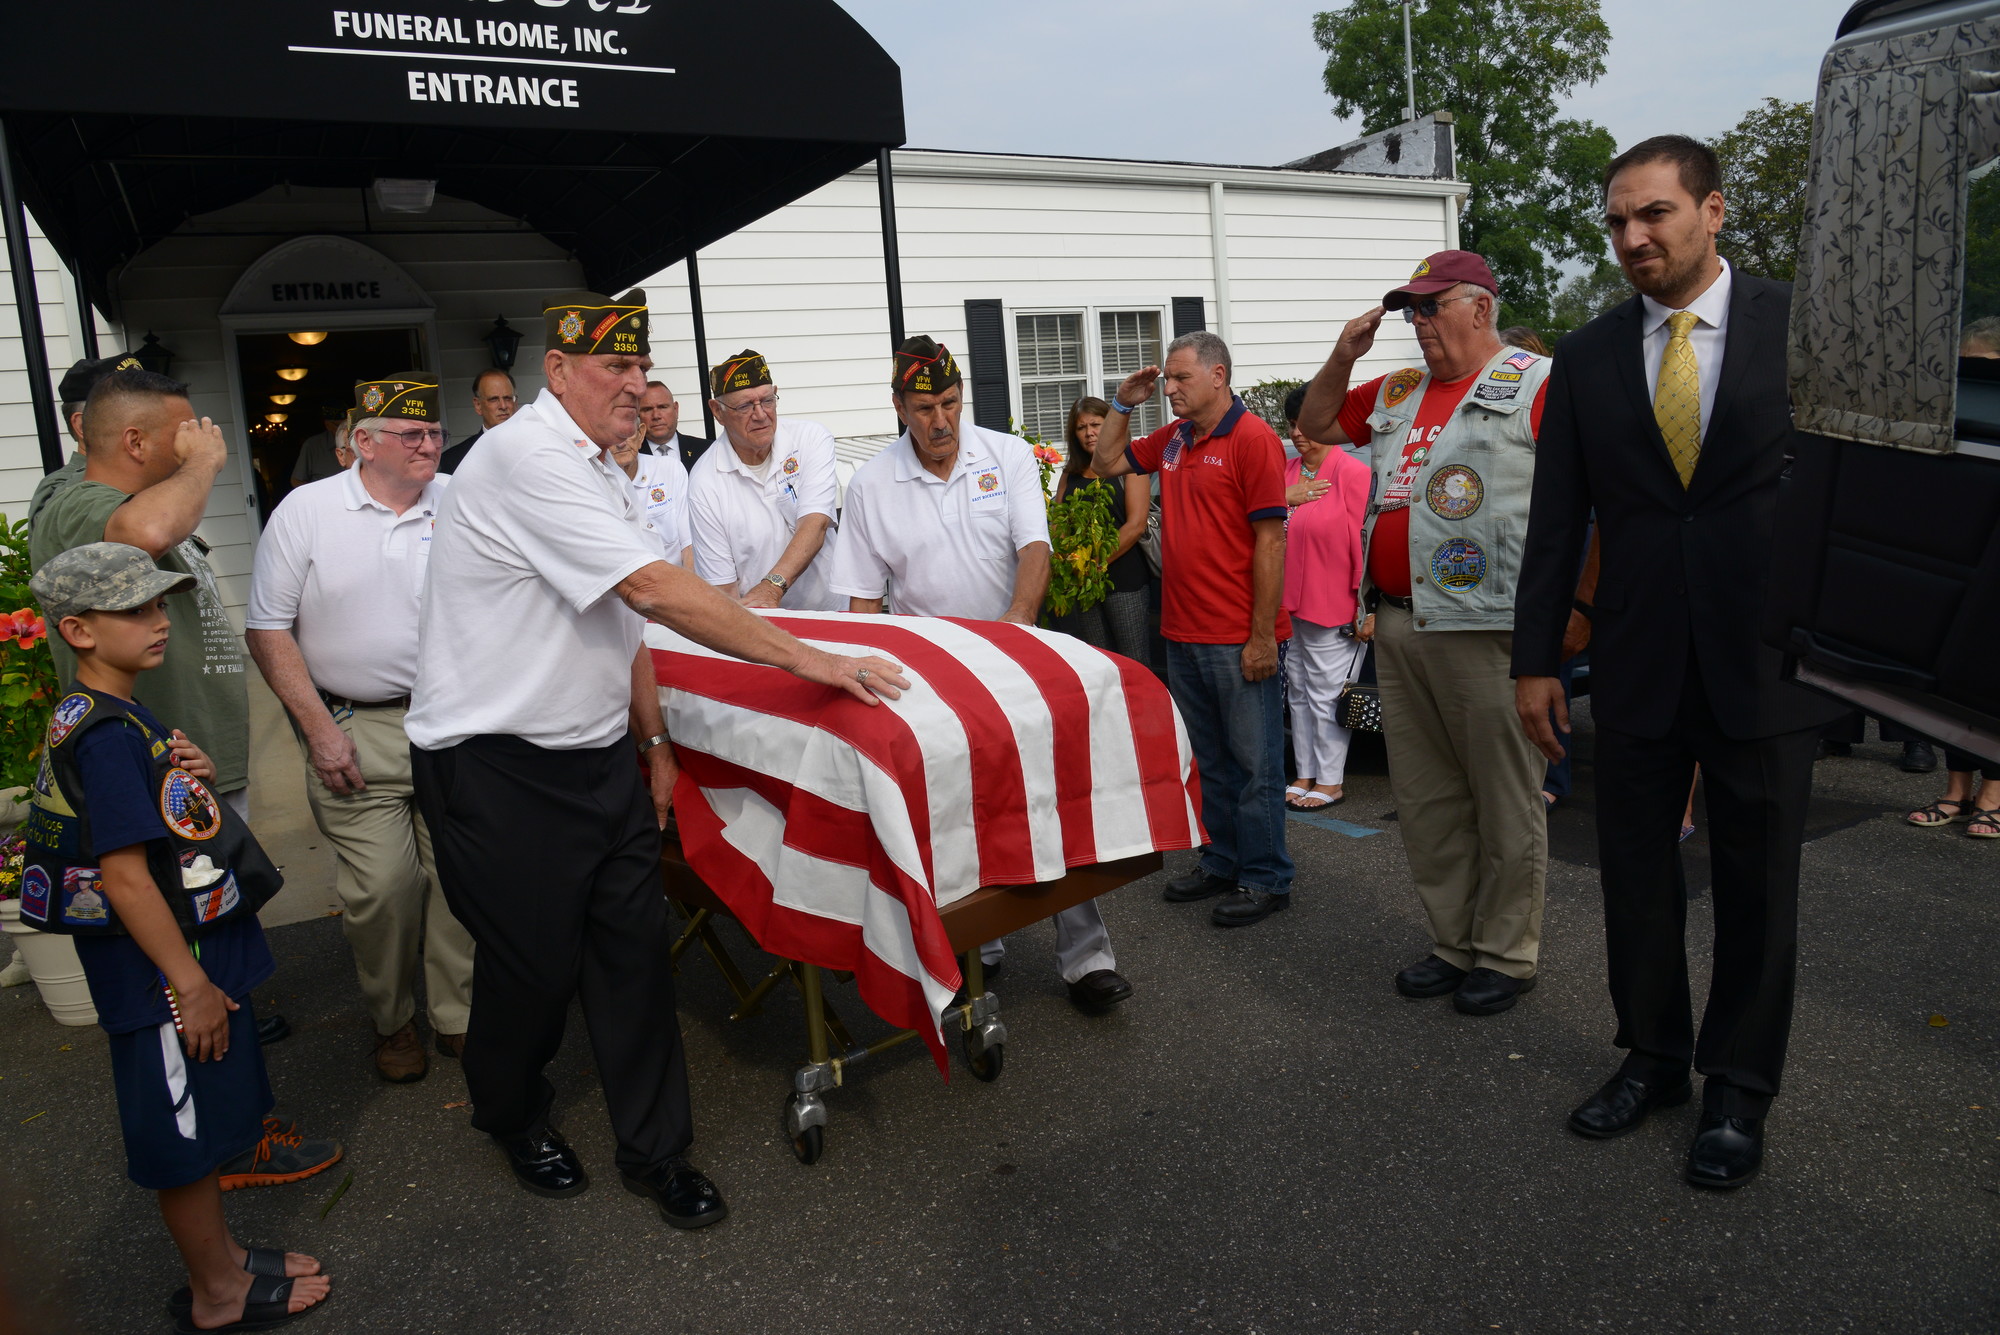 Members of VFW 3350, from East Rockaway, served as pallbearers at the funeral for Angel Gallant. (Penny Frondelli/Herald)